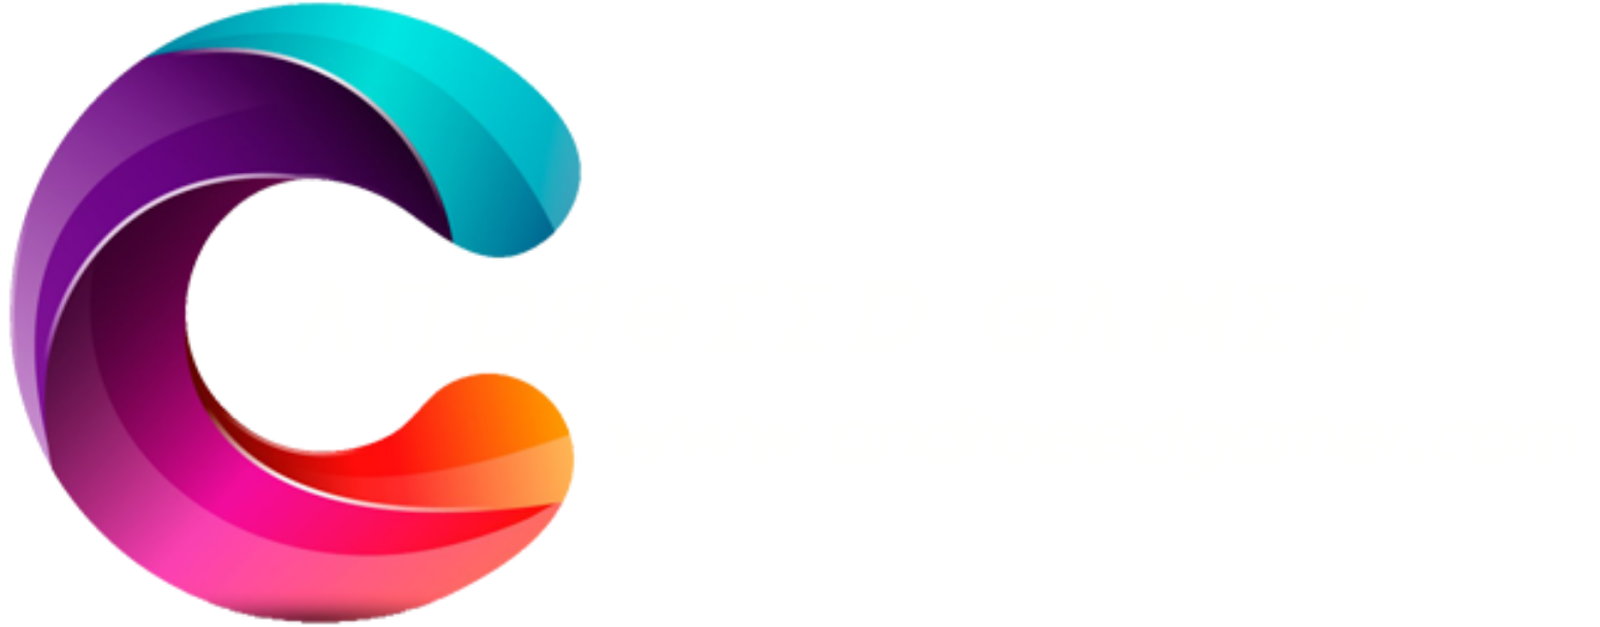 Androeed Gamer